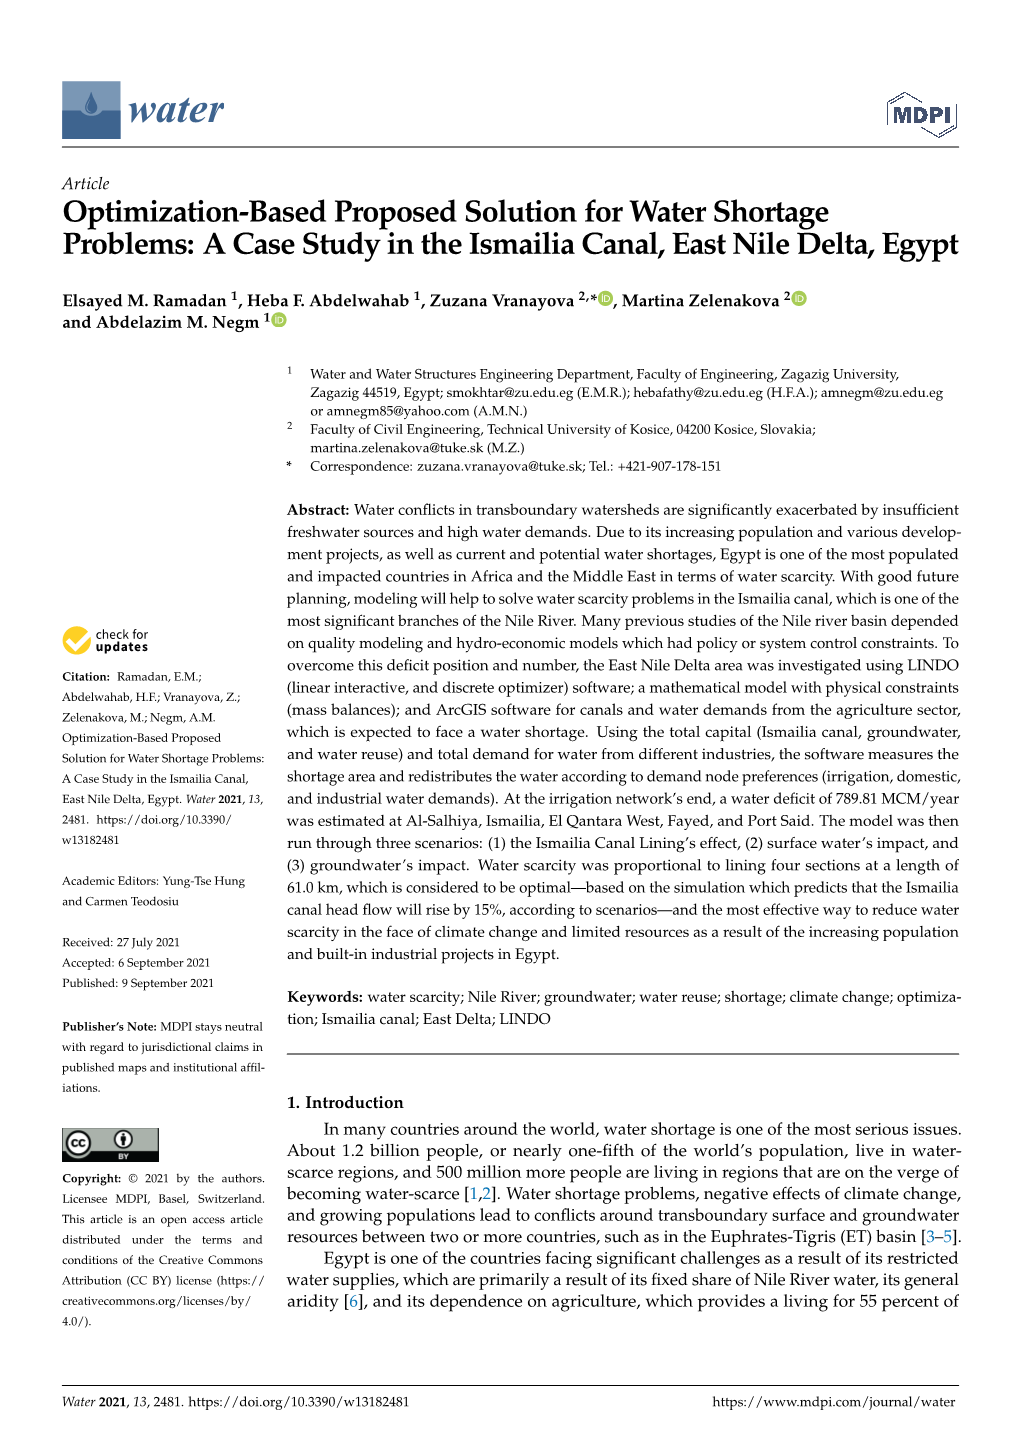 A Case Study in the Ismailia Canal, East Nile Delta, Egypt